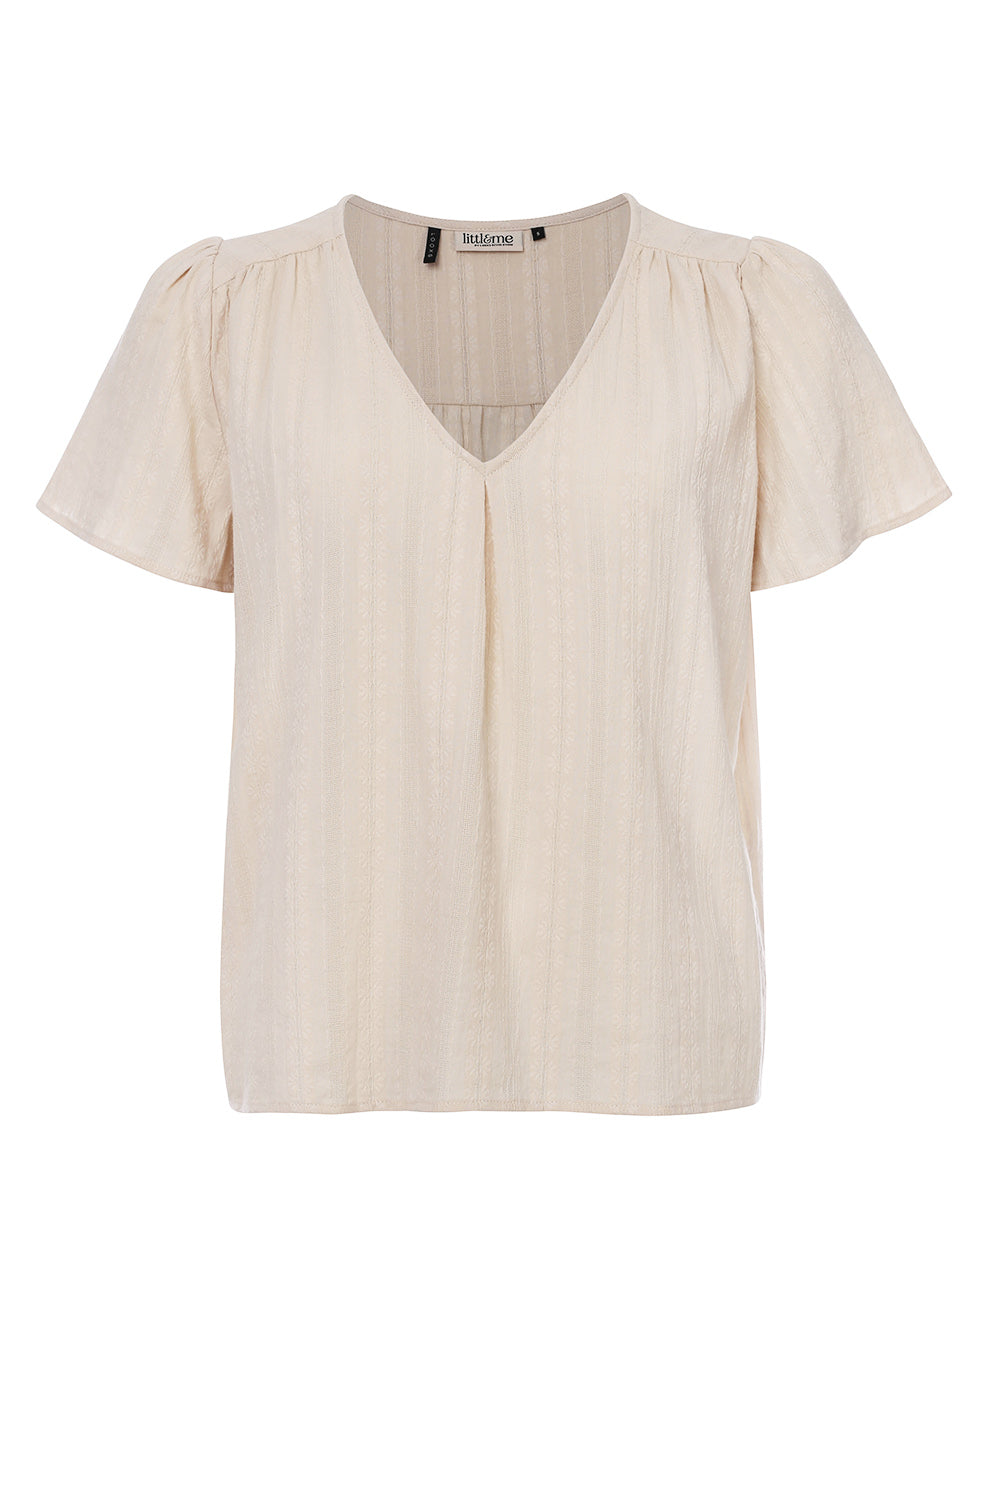 LOOXS Little & Me Woven top s/s